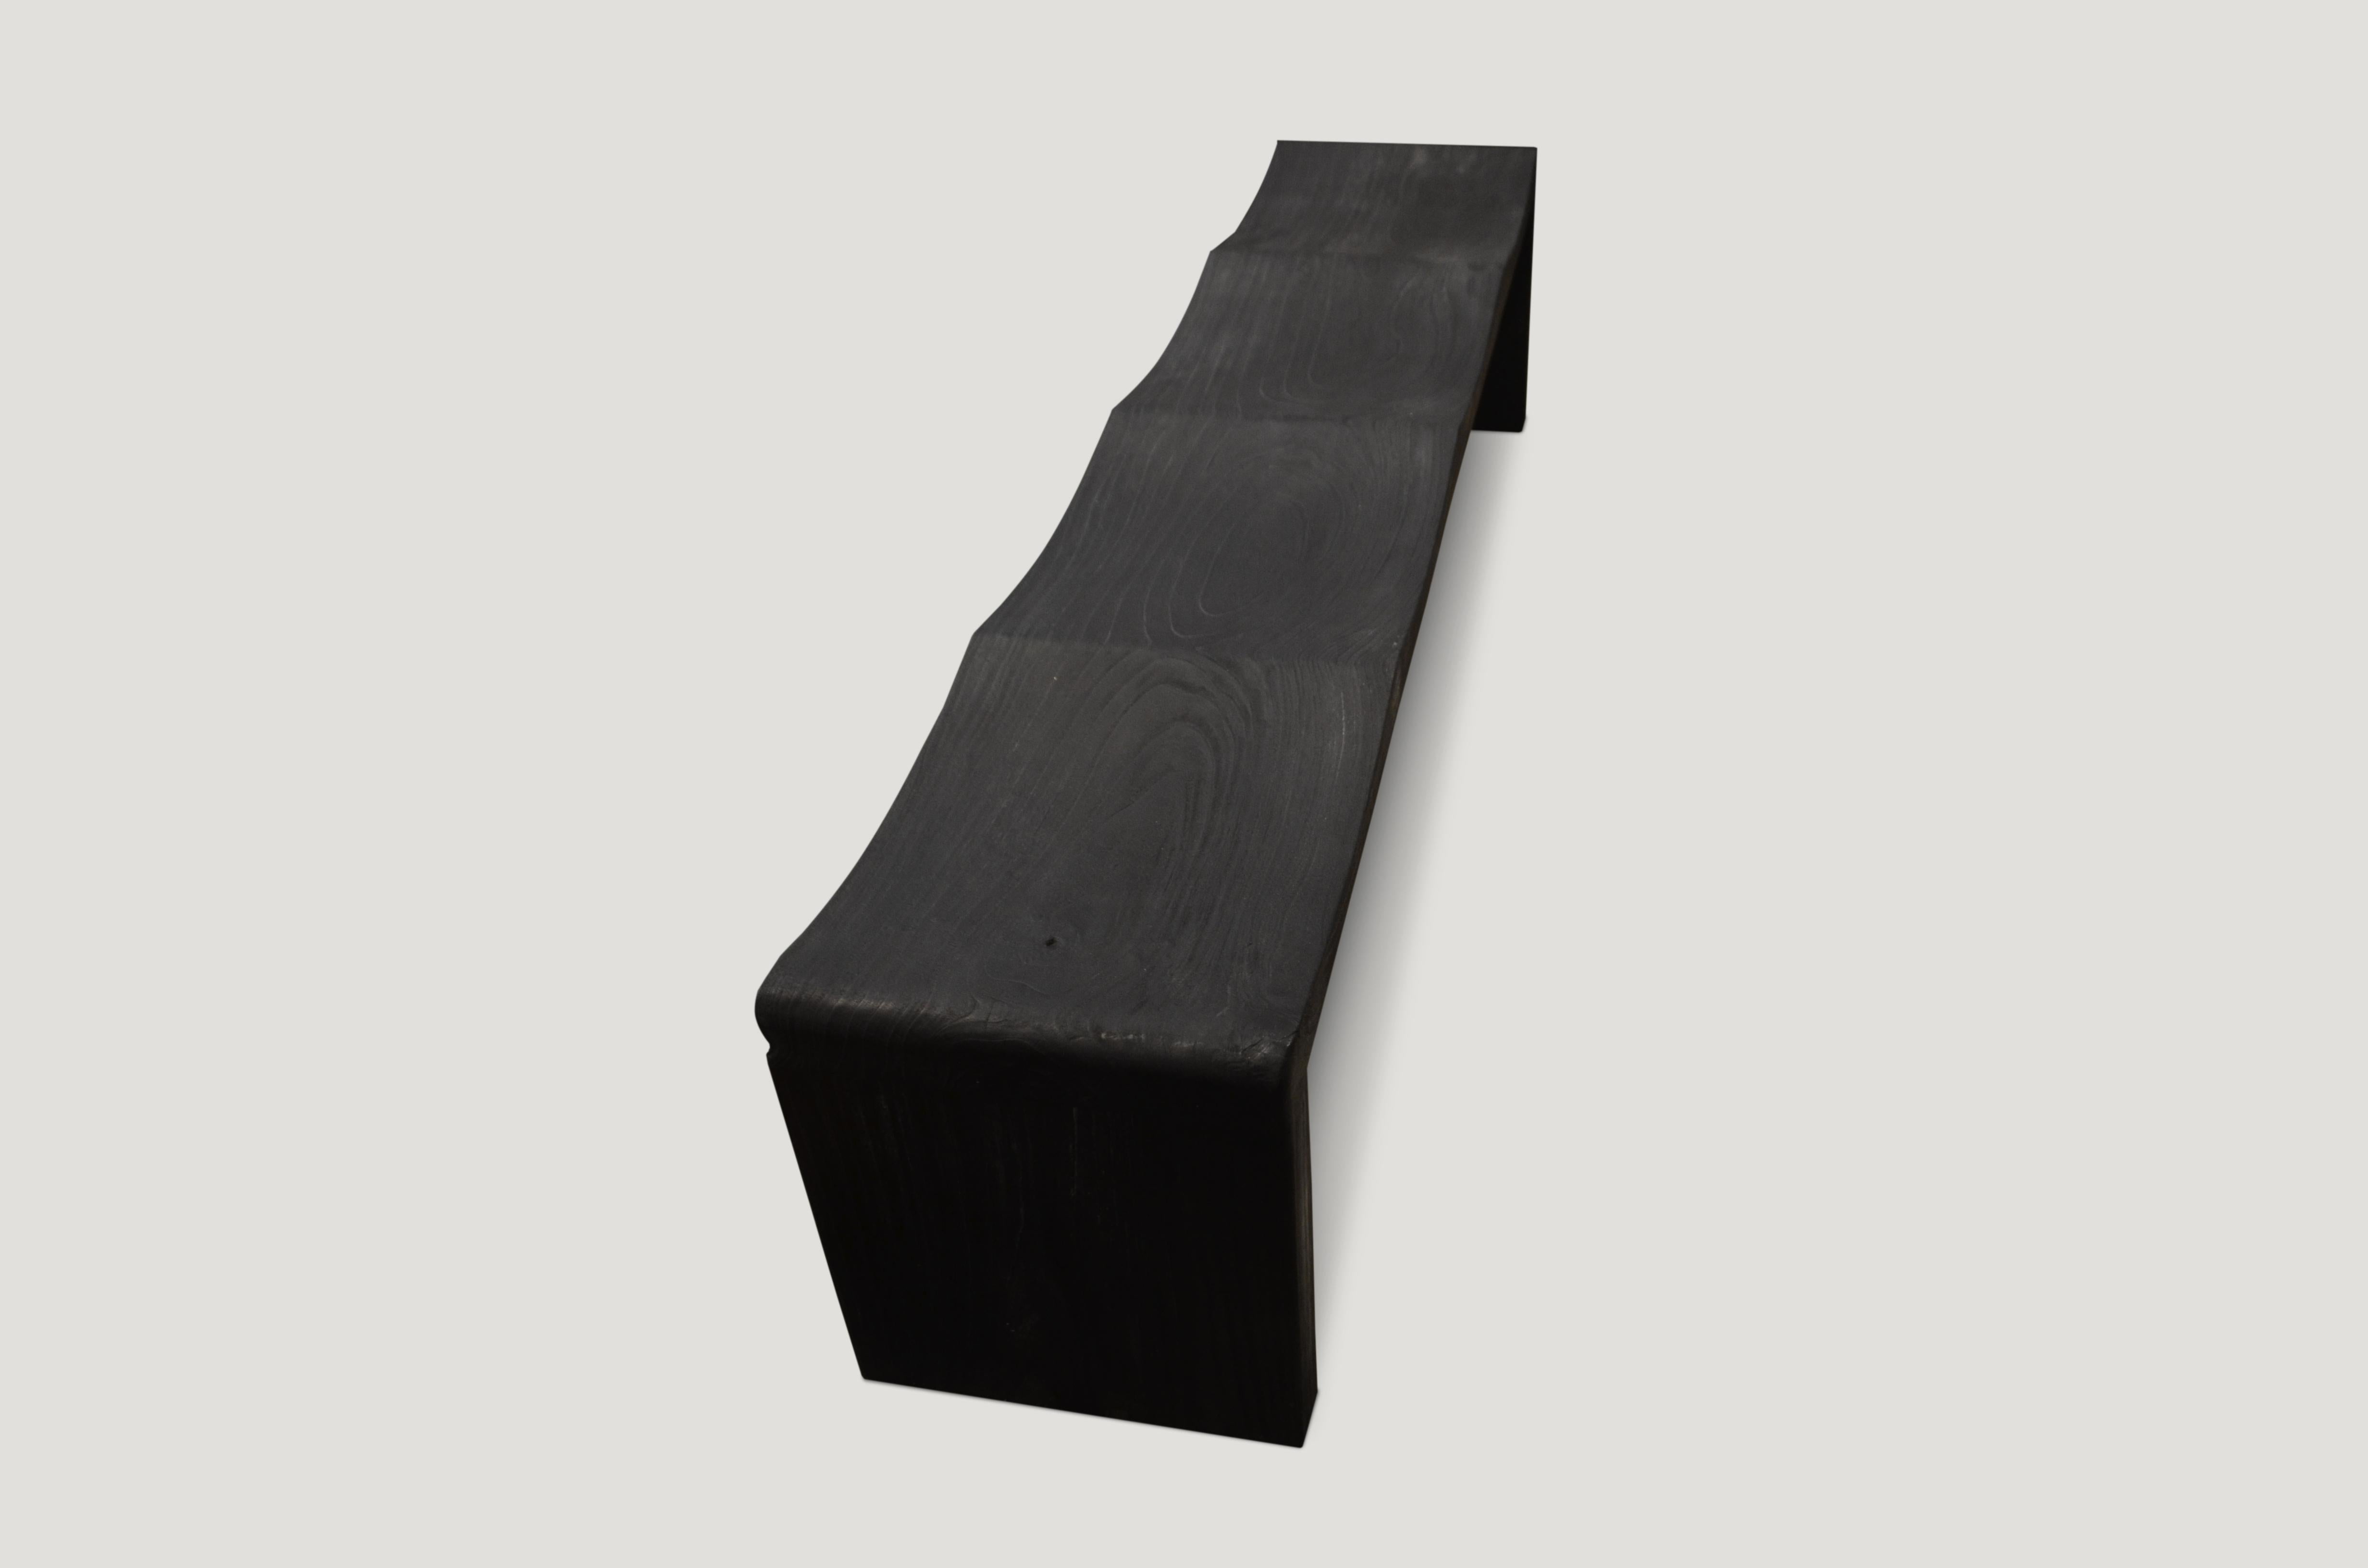 The teak wave bench represents a sleek, modern aesthetic, designed to provide comfort and durability. Solid reclaimed teak wood is hand carved into a wave design. Burnt, sanded and sealed leaving the grain of the wood showing. Available in matte and